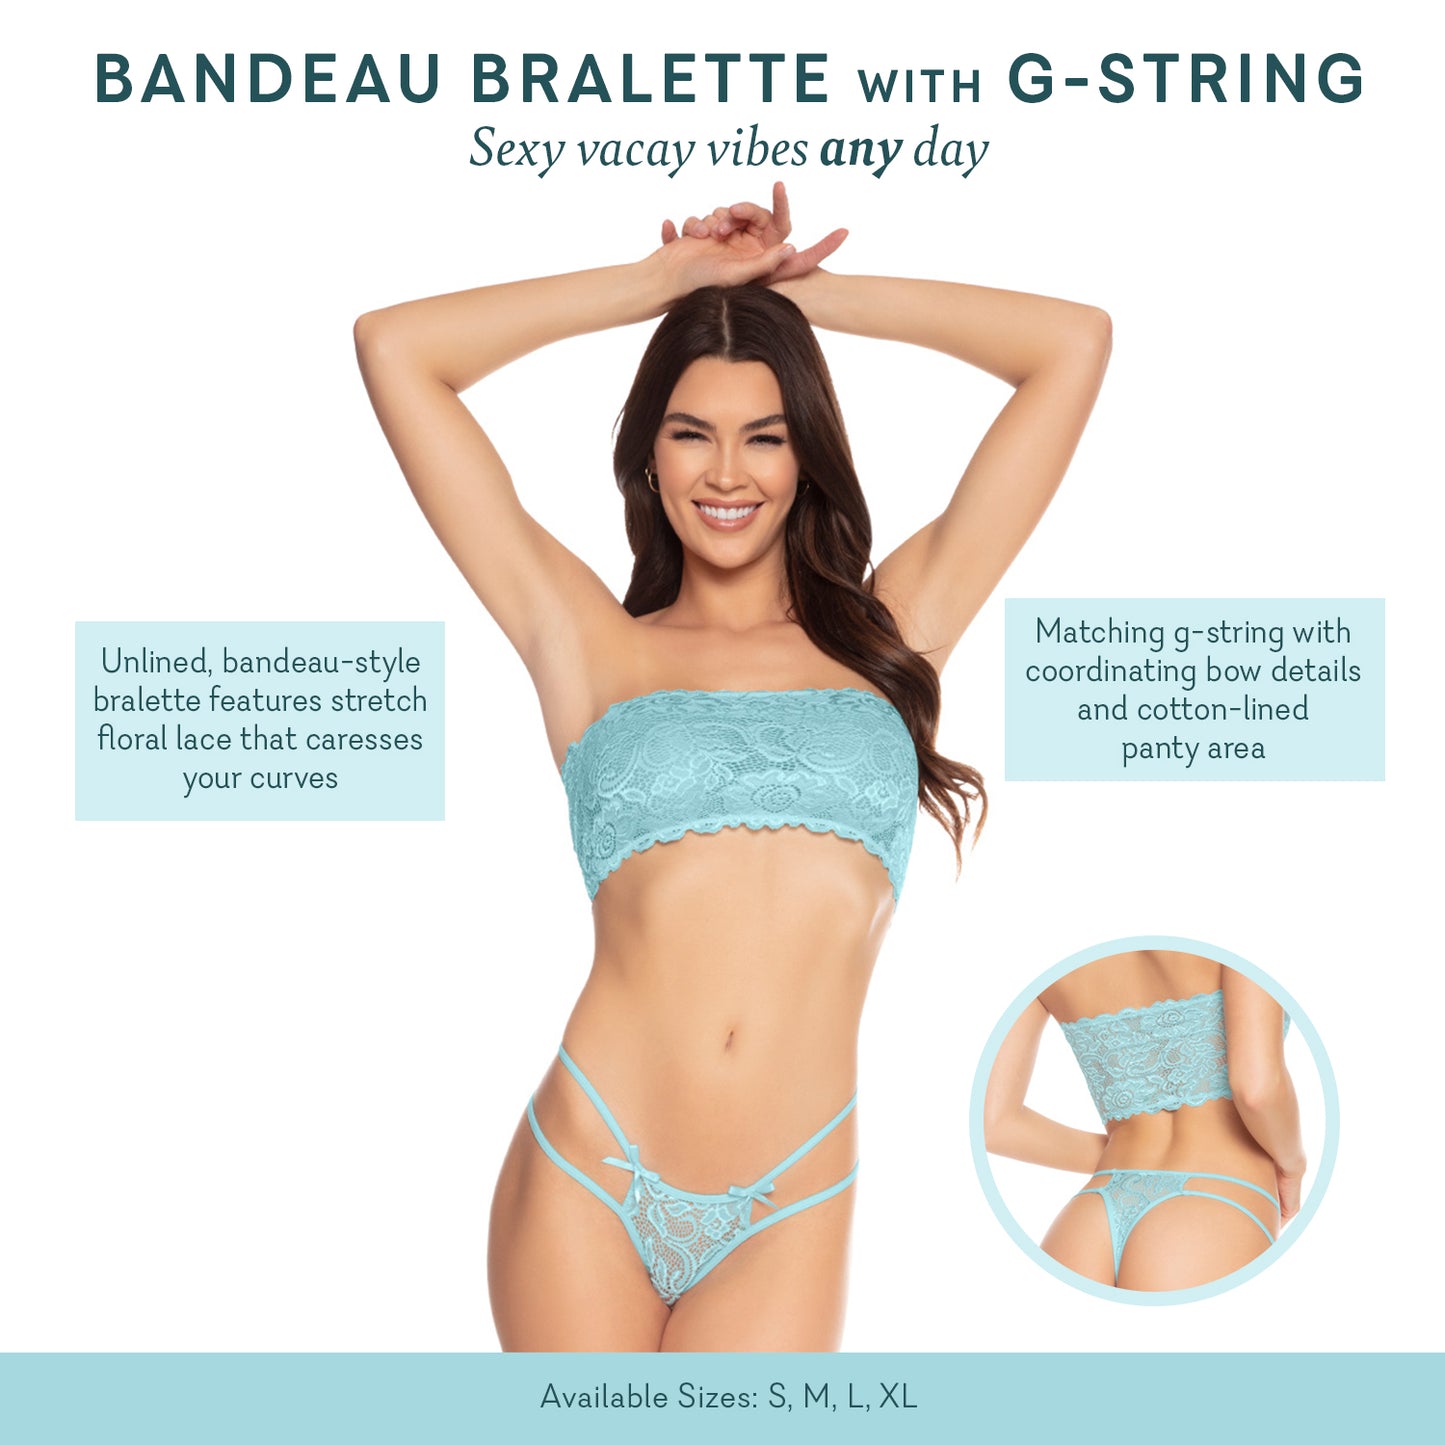 Bandeau Bralette with G-string – Pure Romance Puerto Rico